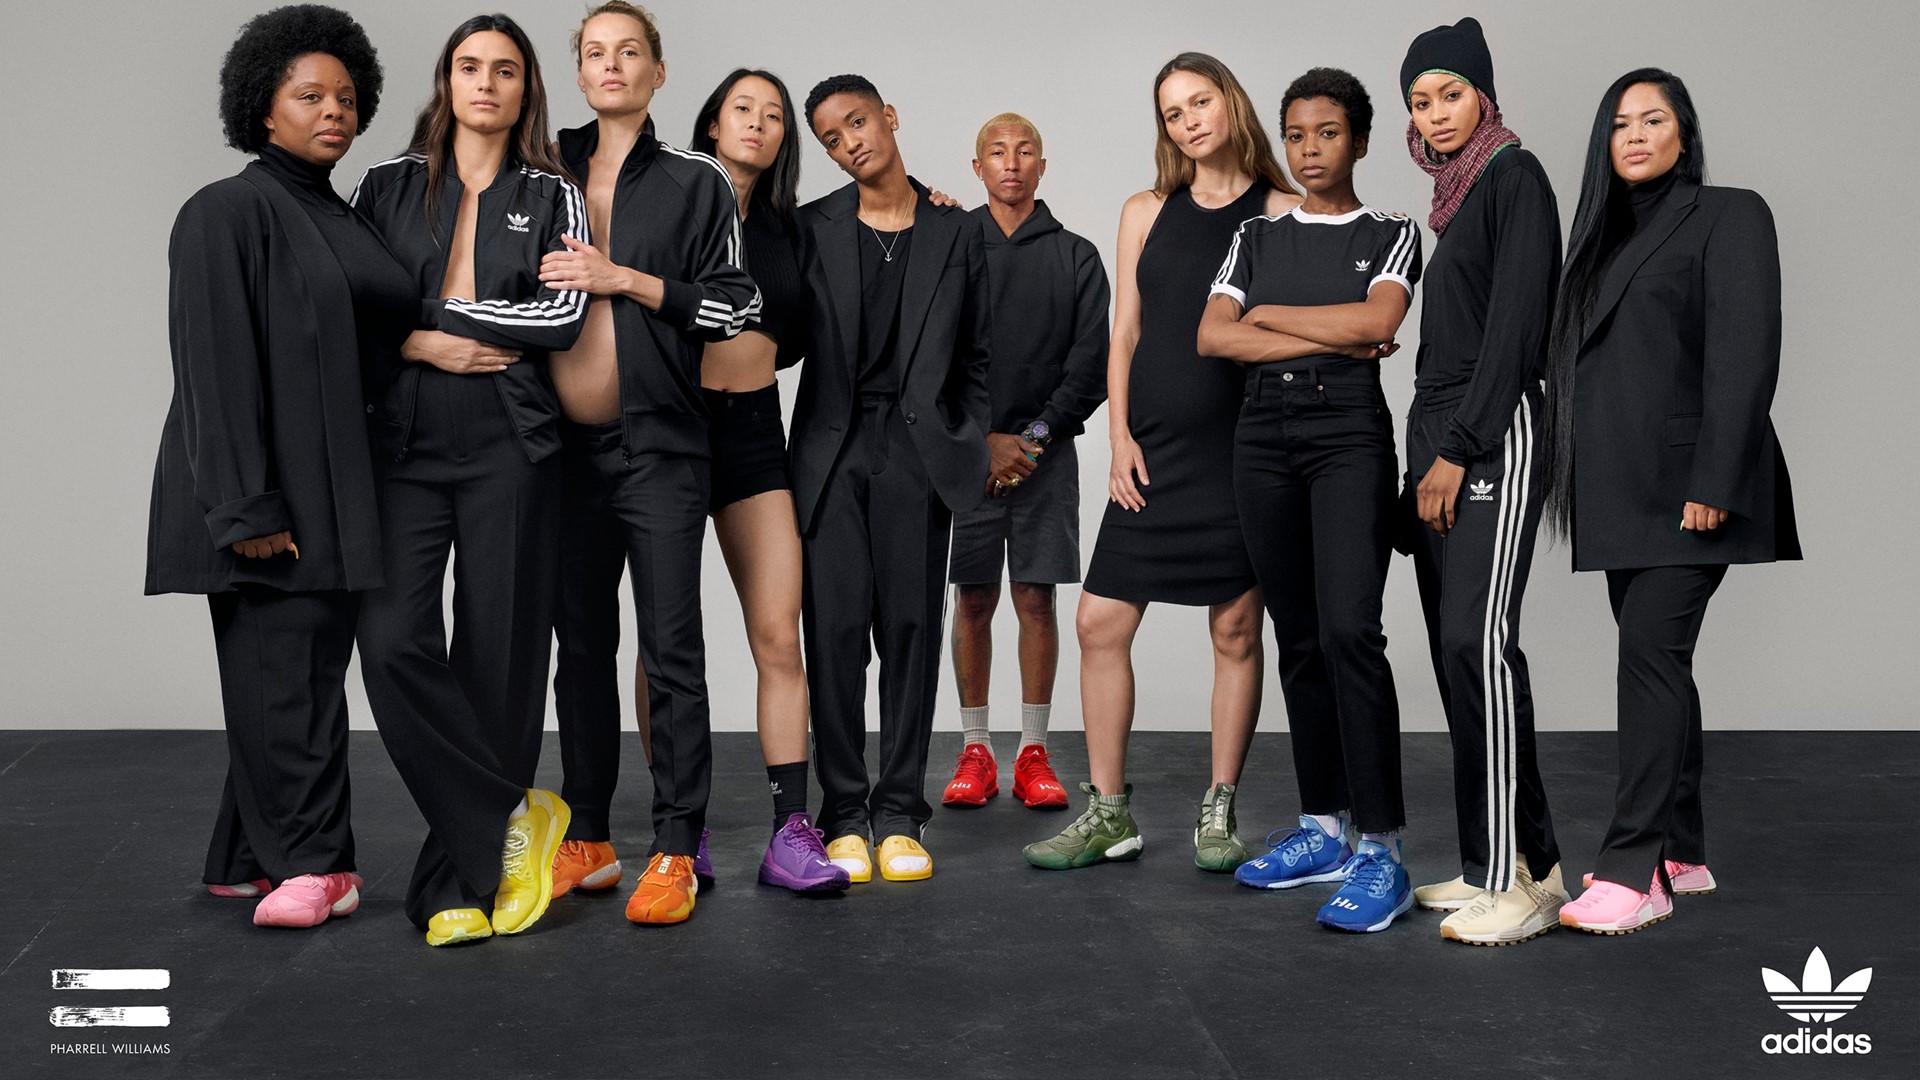 Petulance Exclamation point Alienate adidas originals by Pharrell Williams announce now is her time collection